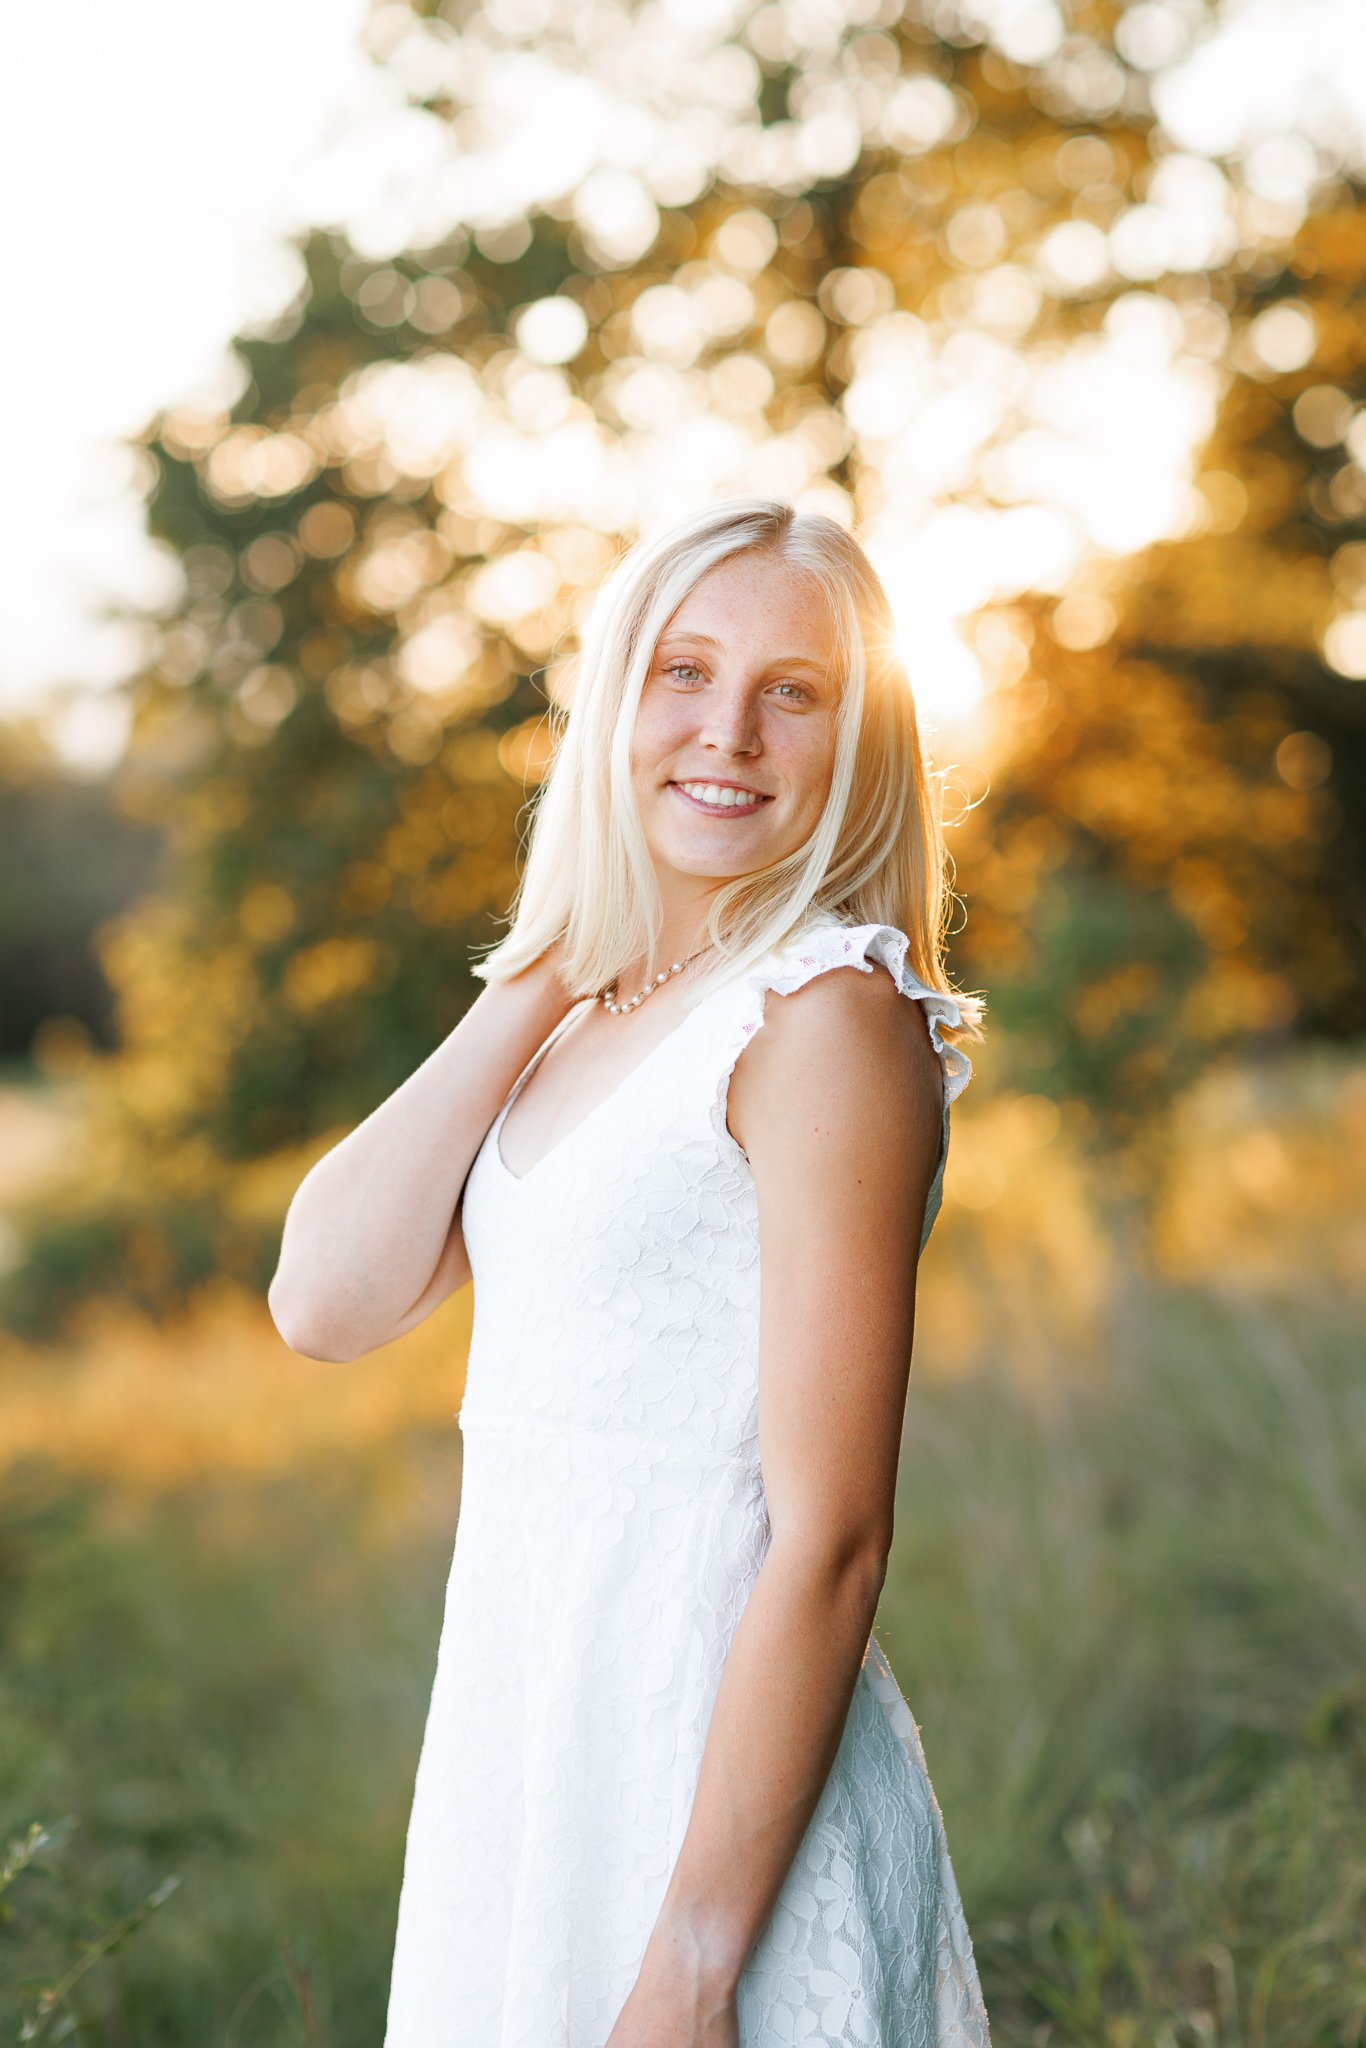 Senior girl pictures outdoor at golden hour in Minneapolis, Minnesota / AMG Photography